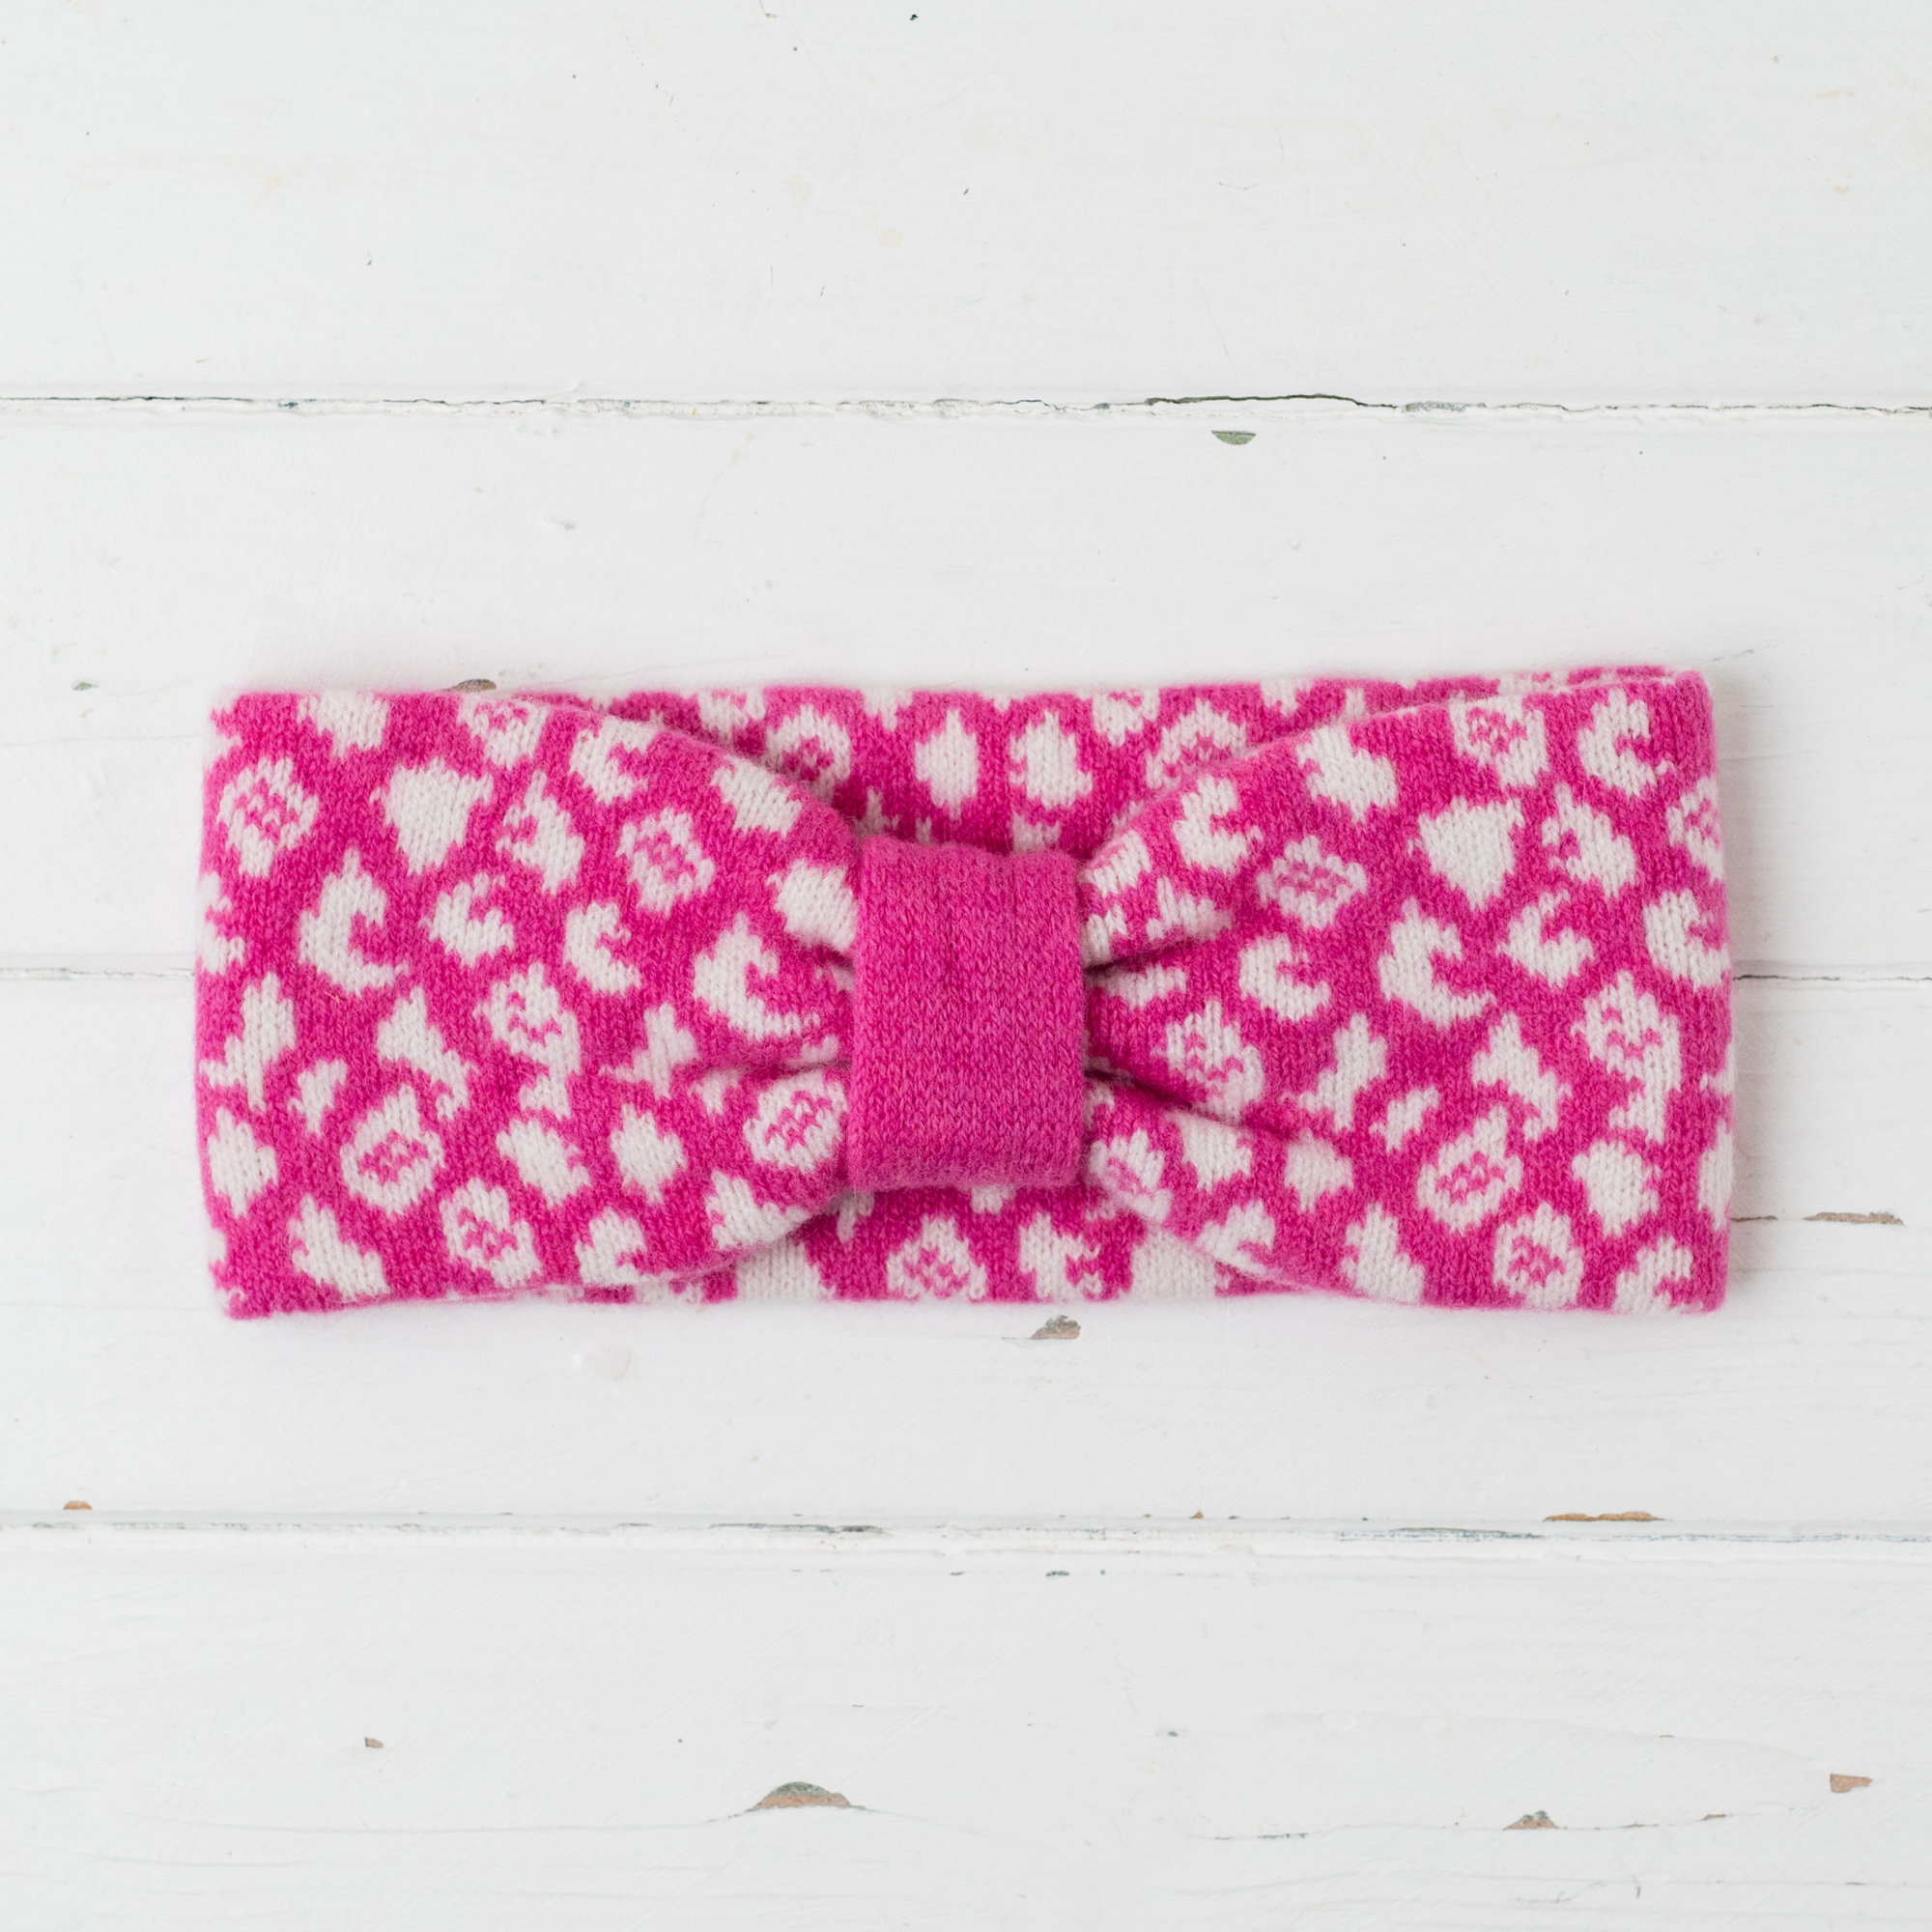 Leopard headband - bubblegum pink and white (MADE TO ORDER)